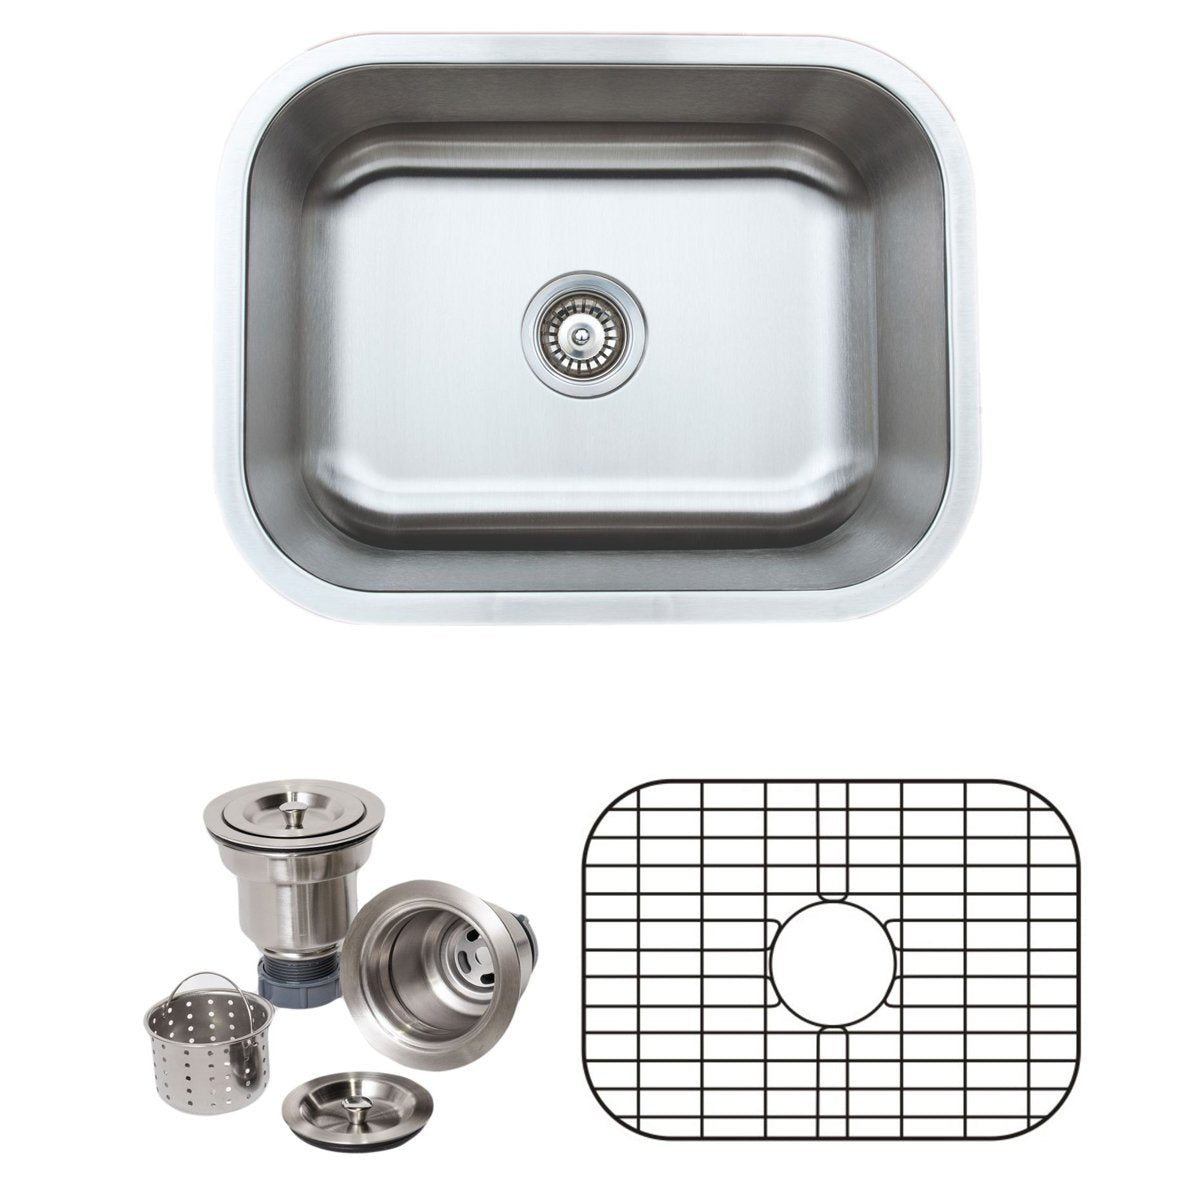 Wells Sinkware 23-Inch 16-Gauge Undermount Single Bowl Stainless Steel Kitchen Sink with Grid Rack and Basket Strainer-Kitchen Sinks Fast Shipping at Directsinks.